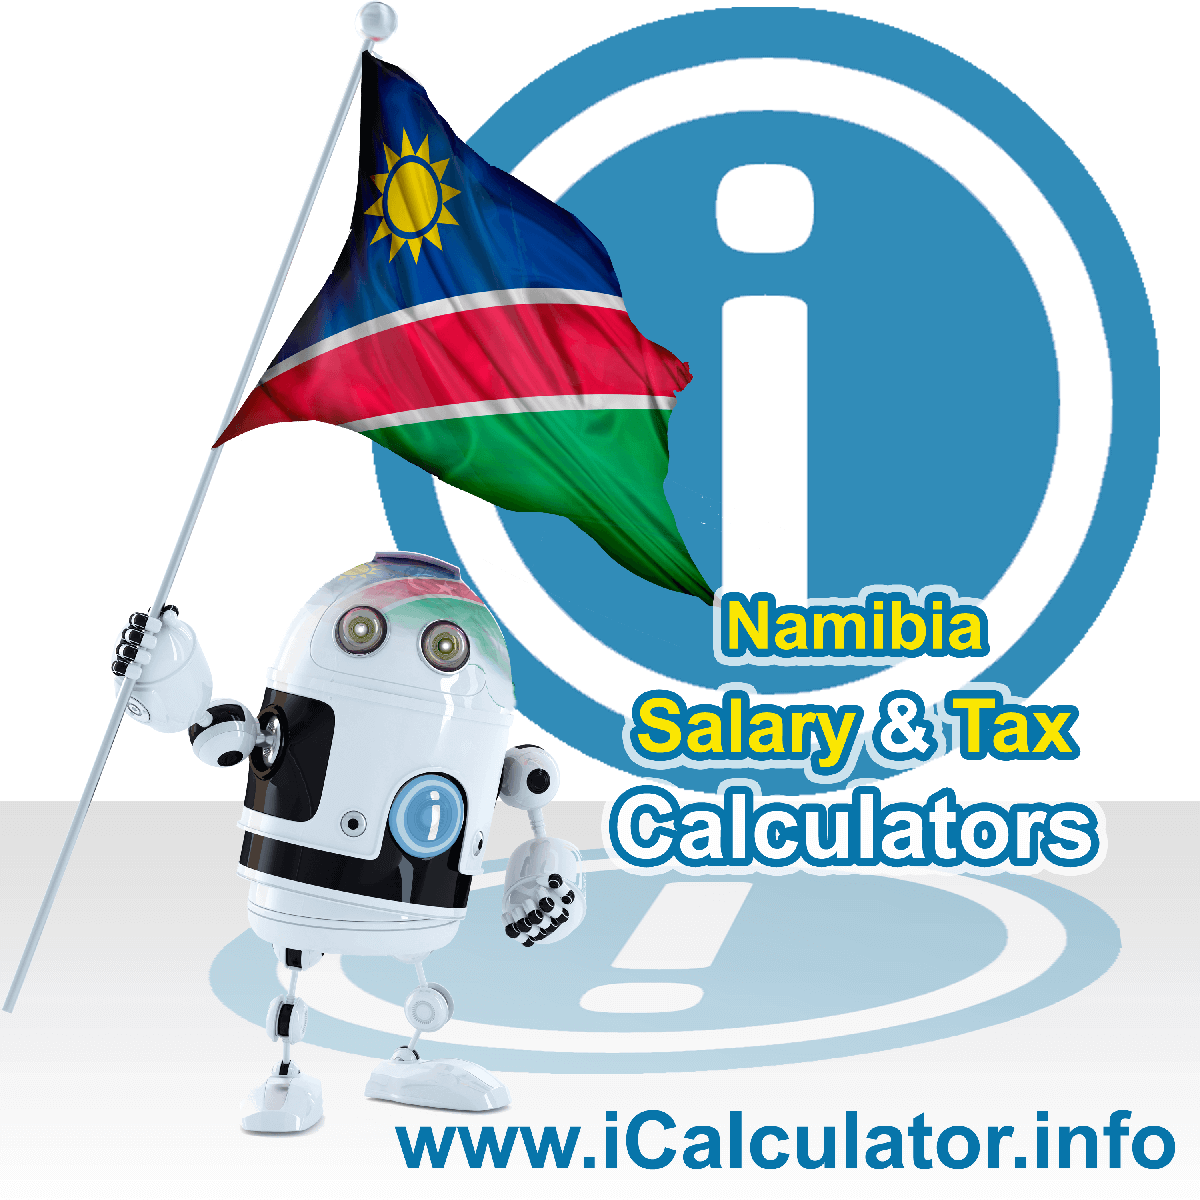 Namibia Salary Calculator. This image shows the Namibiaese flag and information relating to the tax formula for the Namibia Tax Calculator